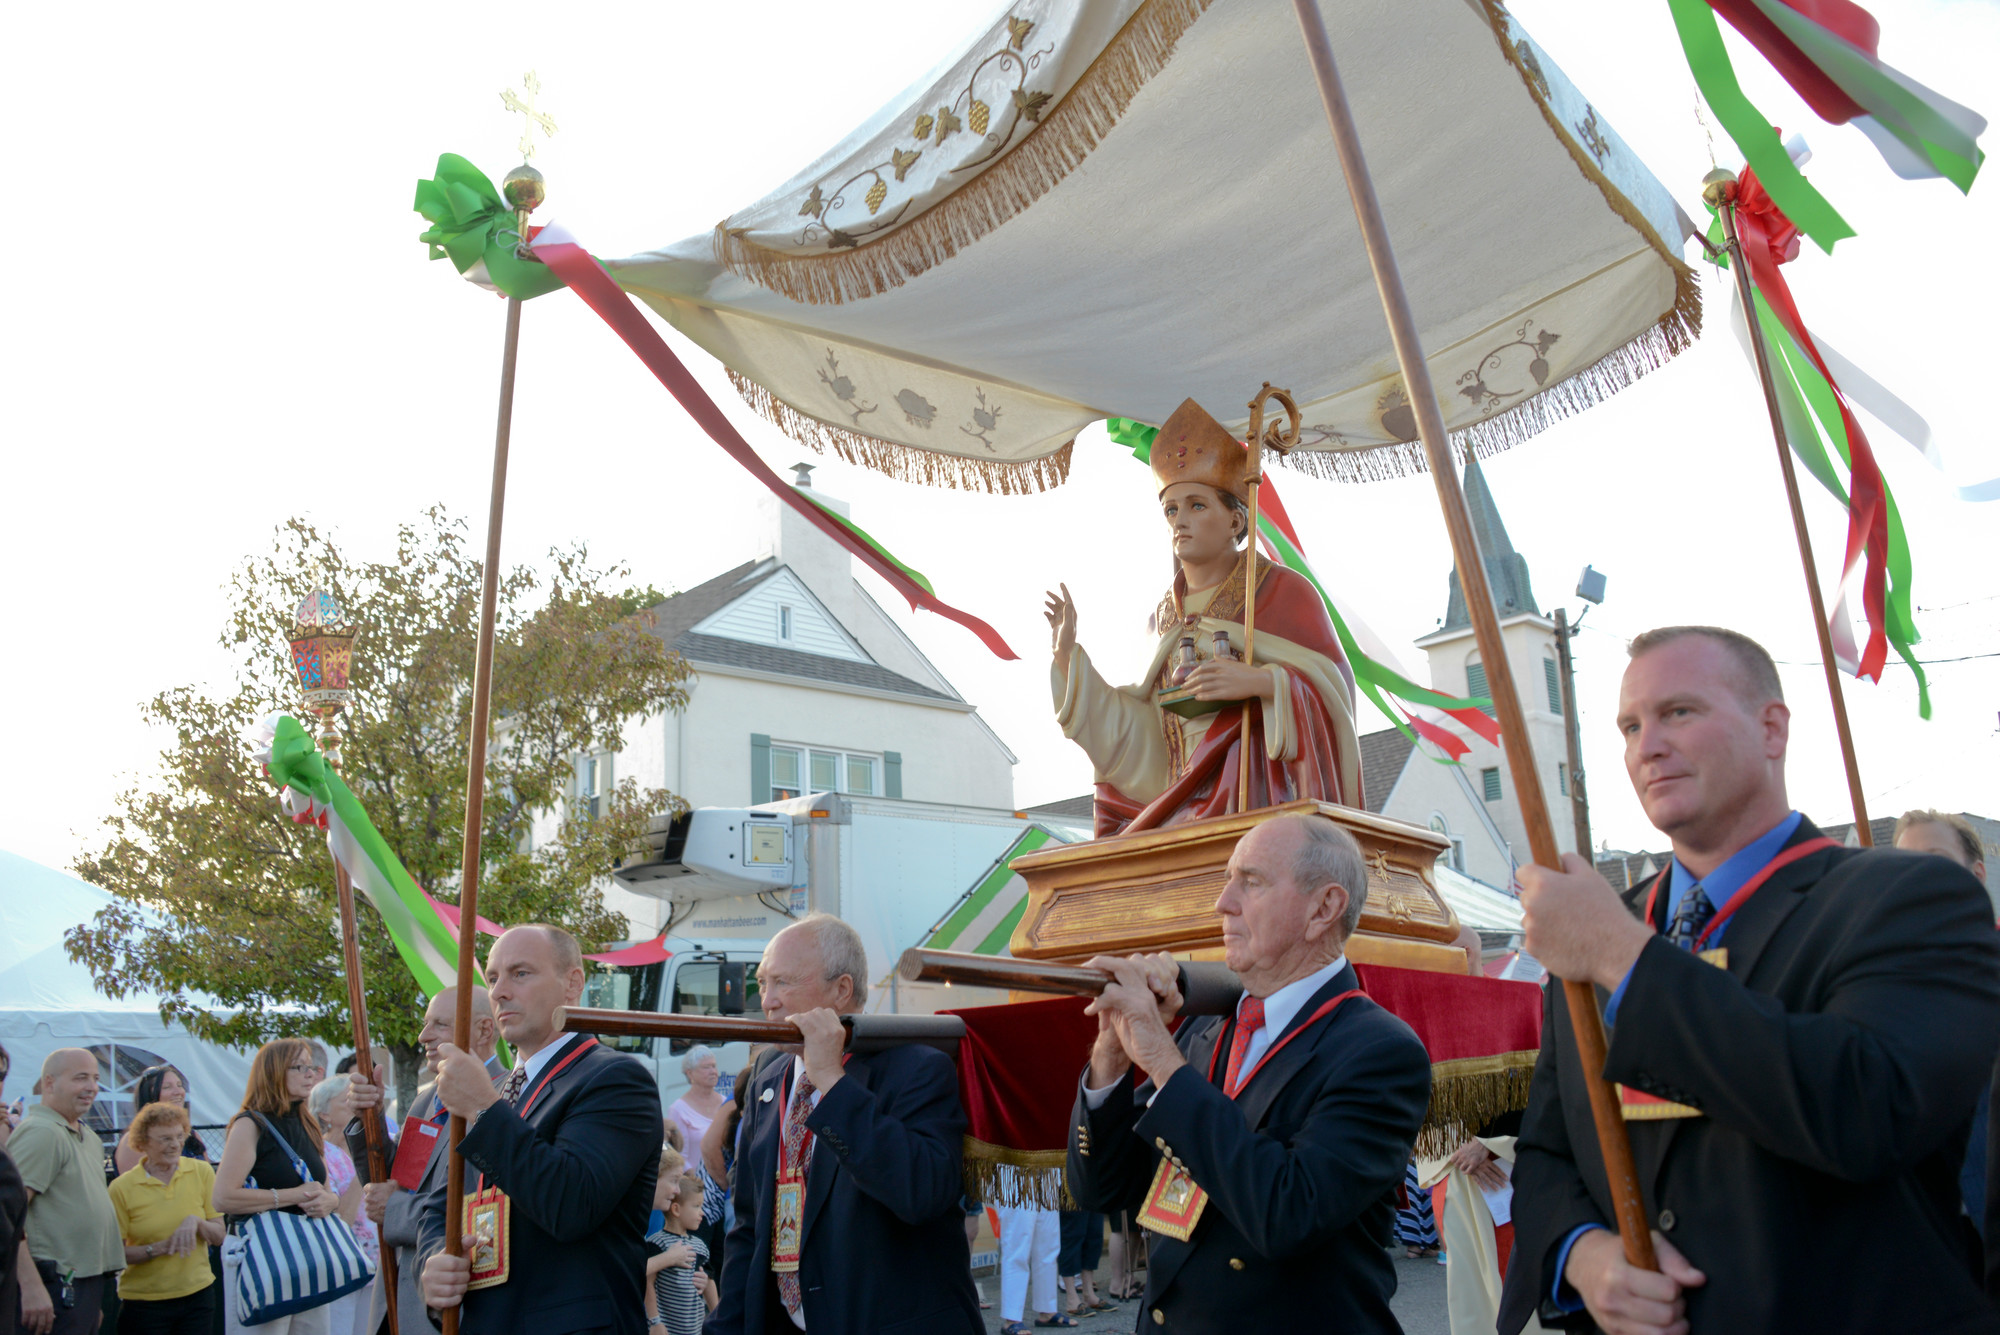 The Statue of San Gennaro was displayed during the opening parade of the Feast on September 4.